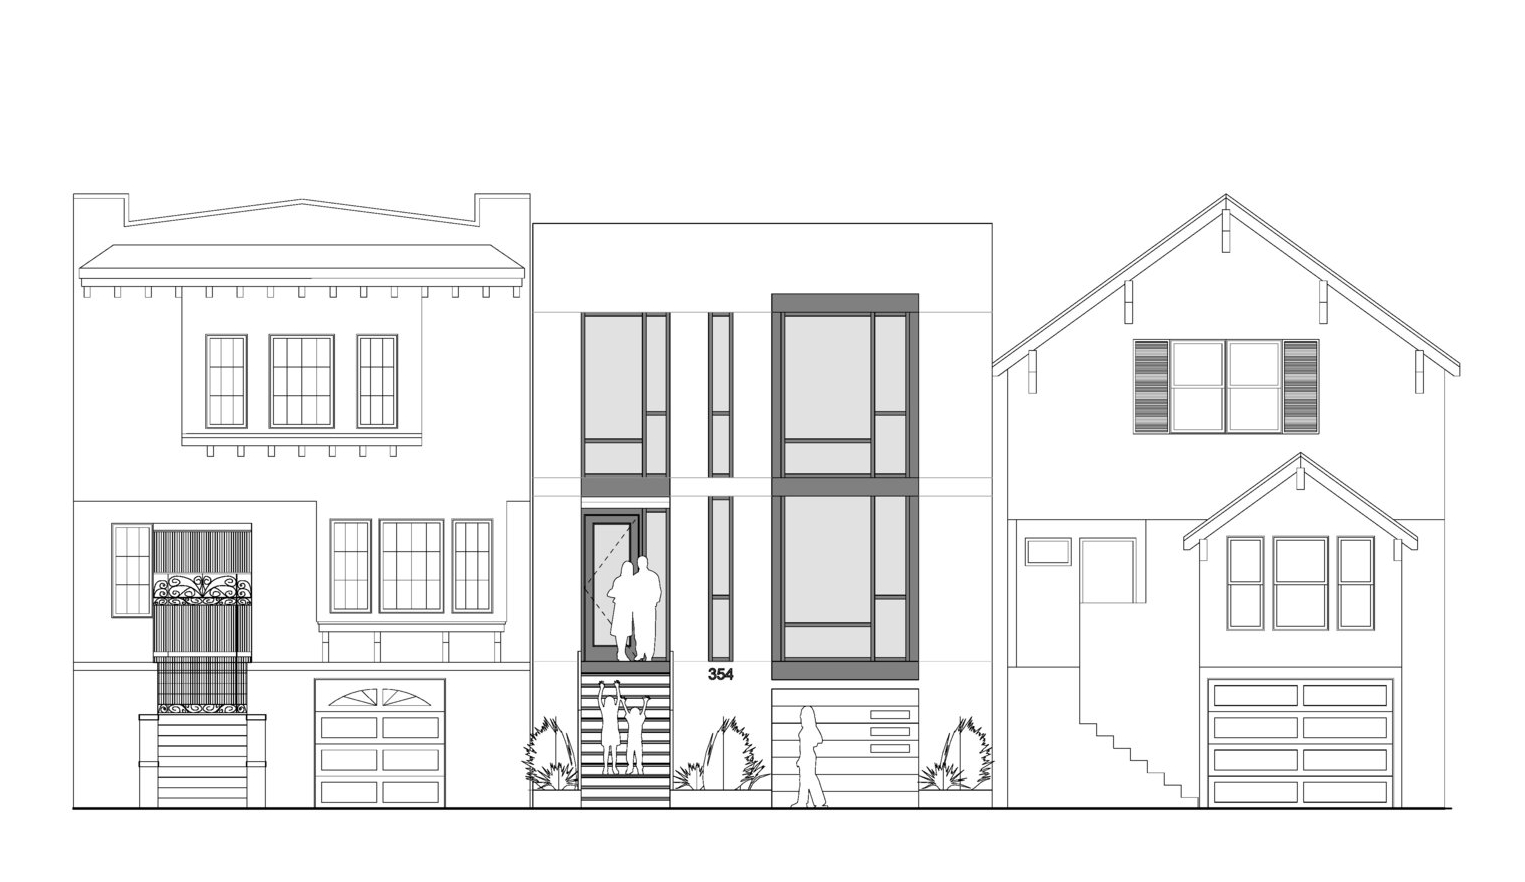 354 27TH AVE 20160602 - Front Elevation.jpg